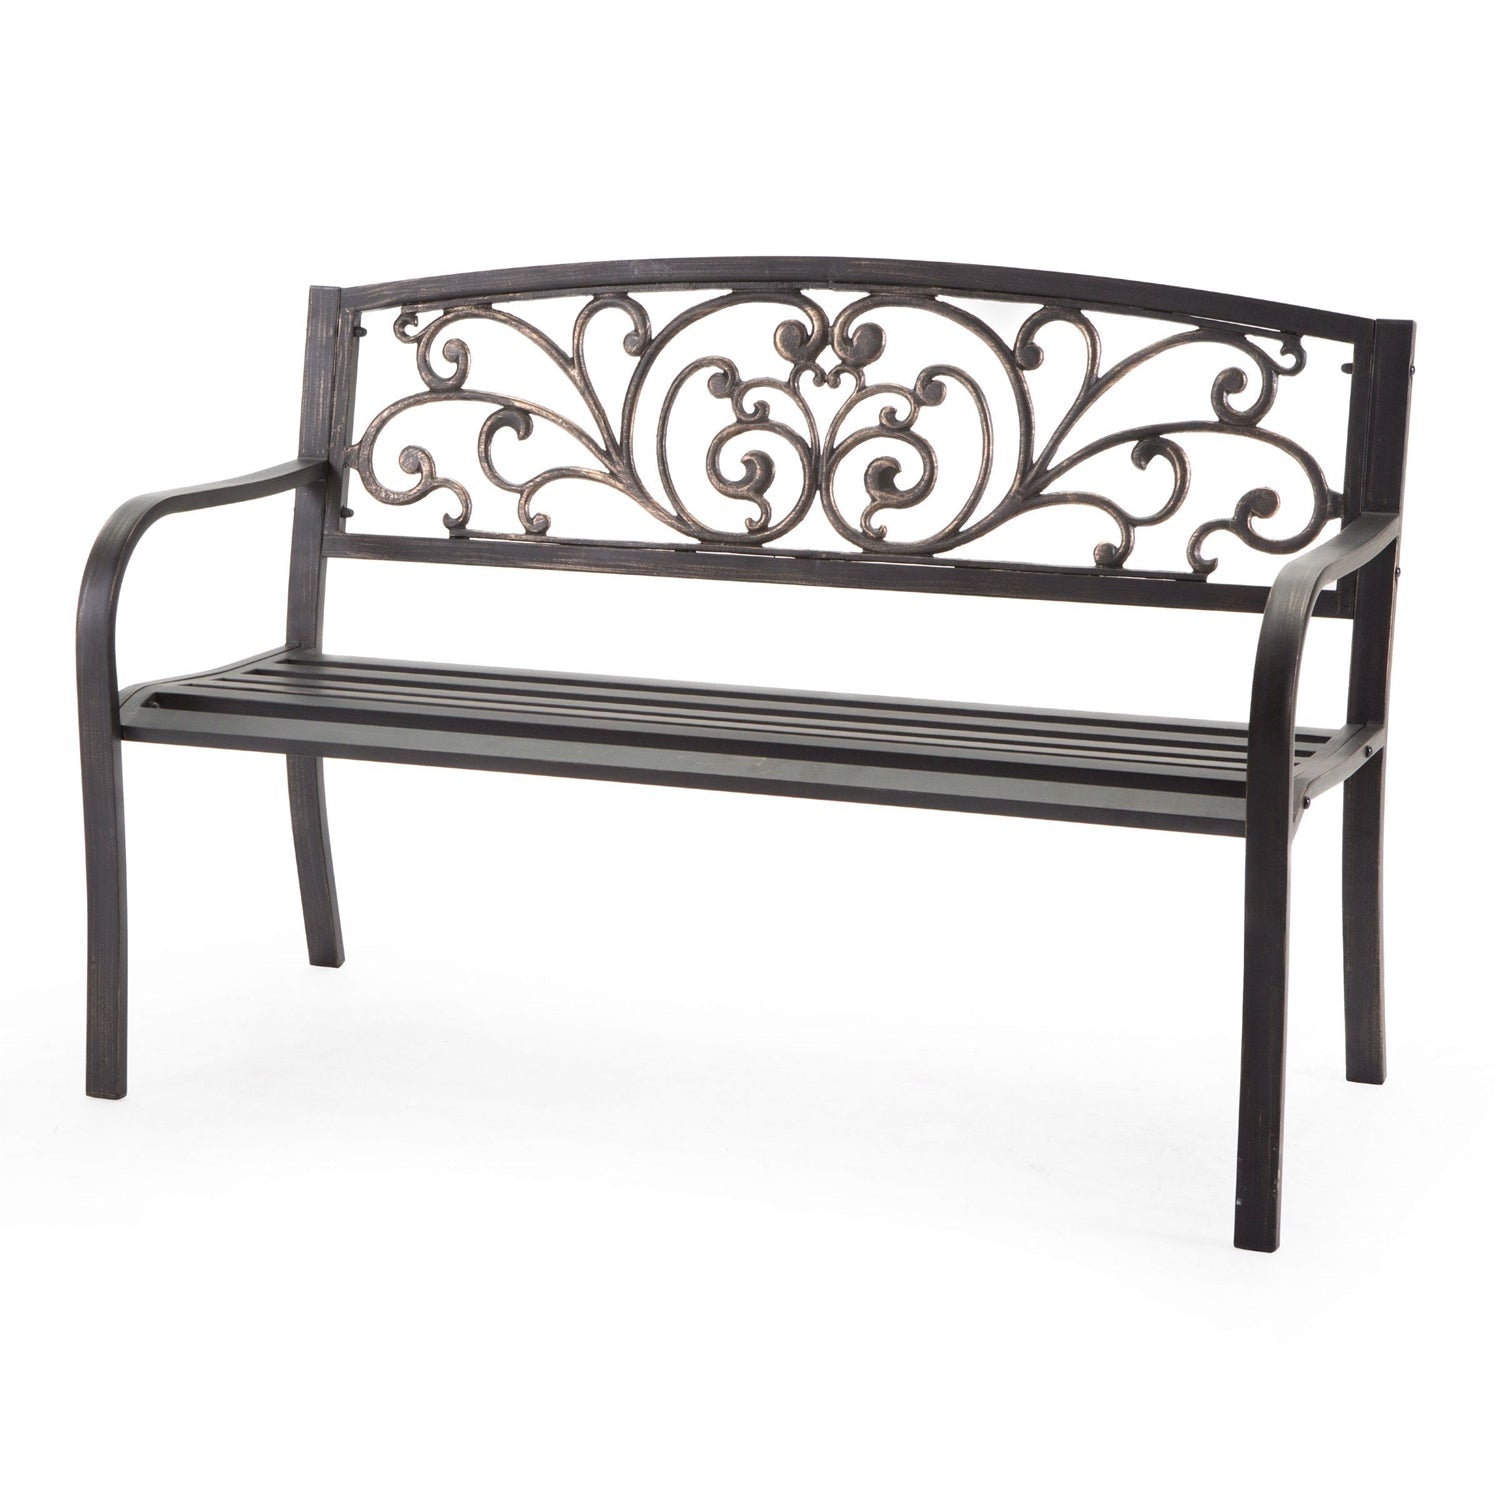 Outdoor > Outdoor Furniture > Garden Benches - Curved Metal Garden Bench With Heart Pattern In Black Antique Bronze Finish